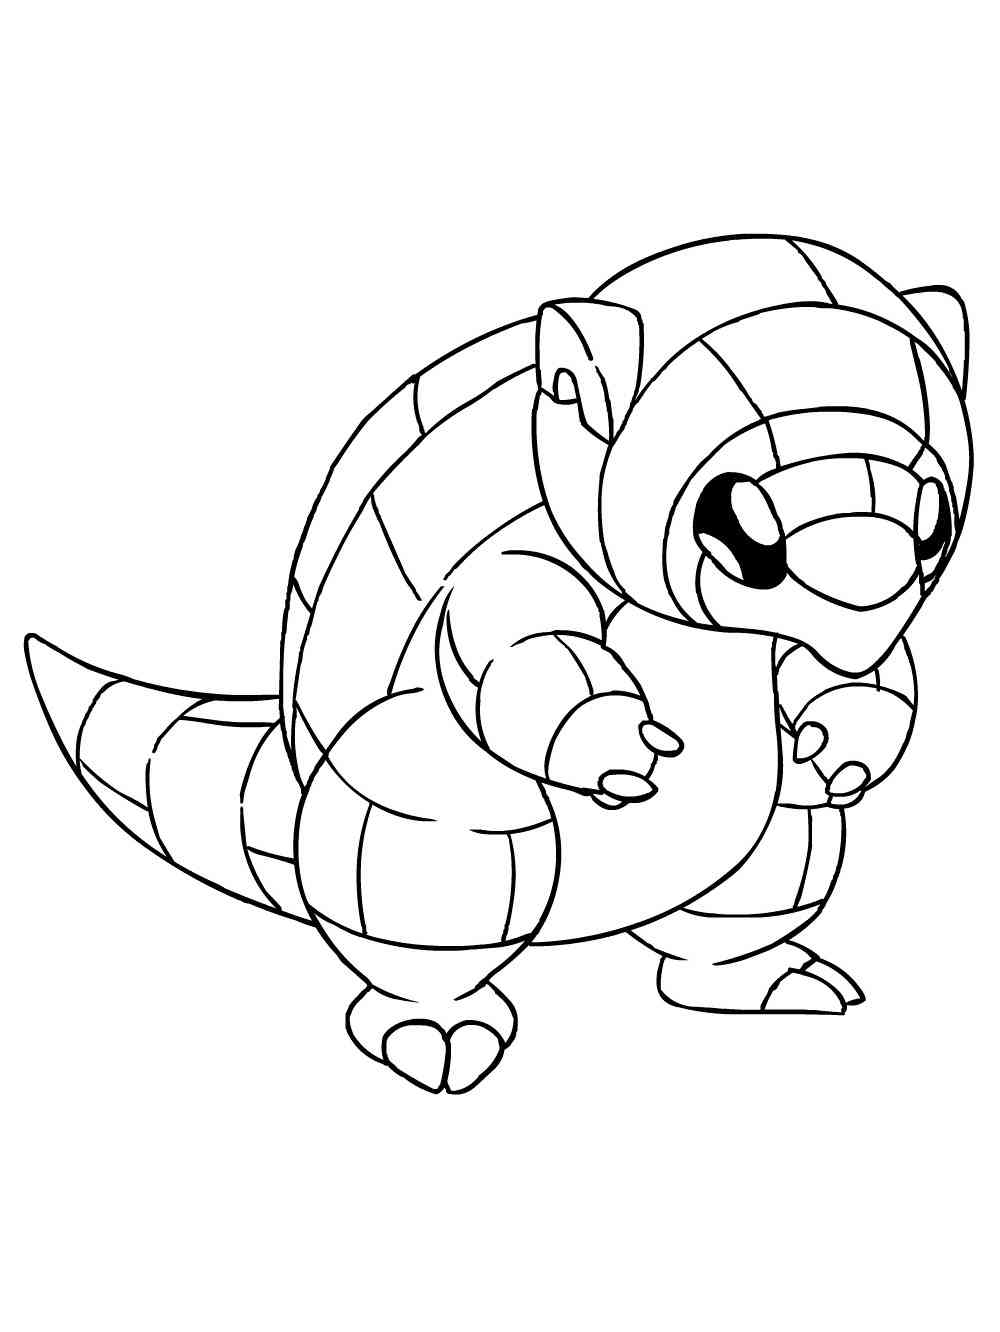 Pokemon Sandshrew coloring pages - Free ...